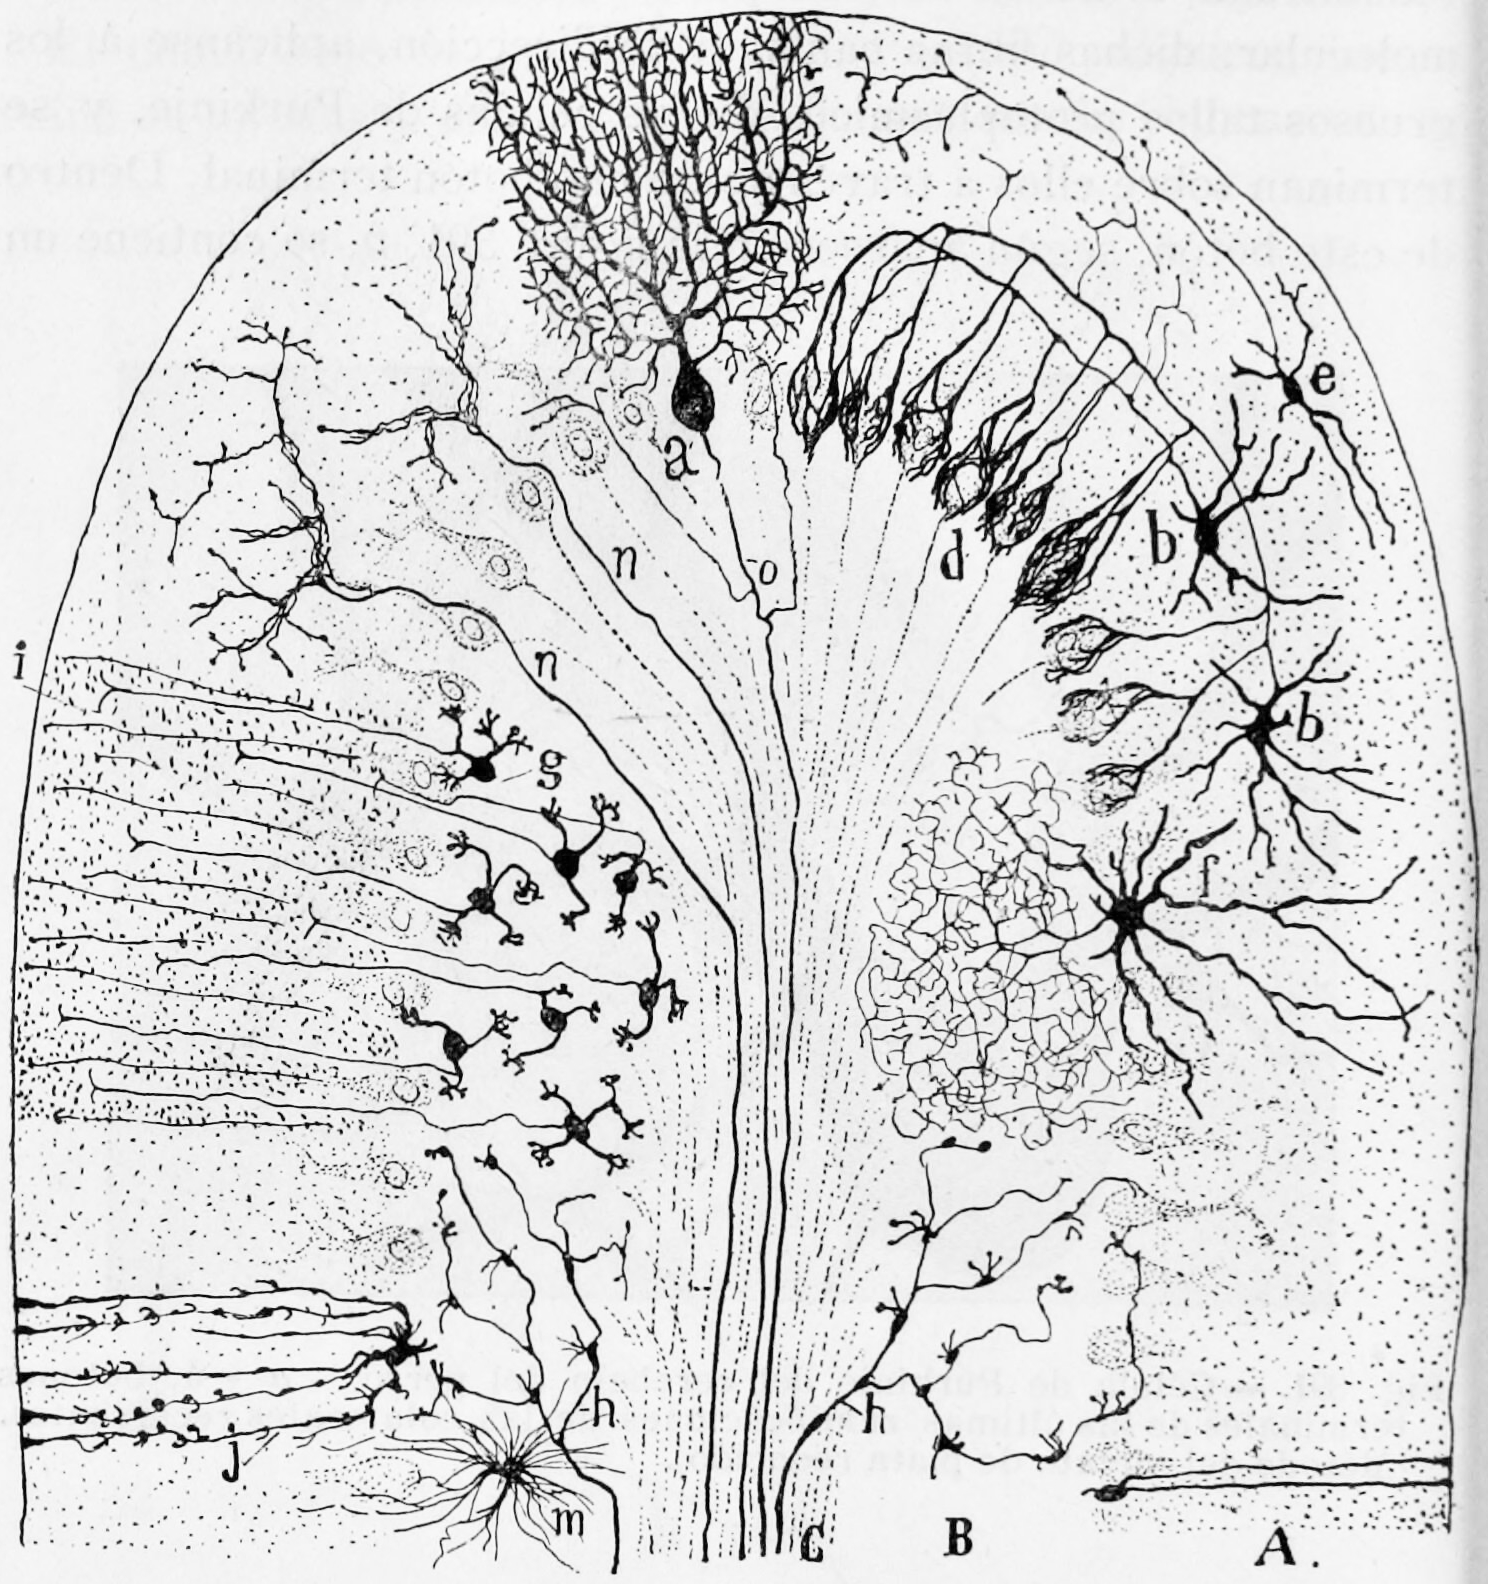 Semischematic representation of a transverse section of a mammalian cerebellar folium (Golgi stain). A) Molecular layer; B) granule cell layer; C) white matter; a) Purkinje cell (frontal view); b) small stellate cells in the molecular layer; d) descending terminal axonal arborizations forming baskets around the cell bodies of Purkinje cells; e) superficial stellate cells; f)large stellate cells in the granule cell layer; g) granule cells with ascending processes bifurcating in i; h) mossy fibres; j) a glial cell; m) glial cell in the granule cell layer; n) climbing fiber. Histologie du système nerveux de l’homme & des vertébrés, Tome Premier (1909) by Santiago Ramón y Cajal translated from Spanish by Dr. L. Azoulay.